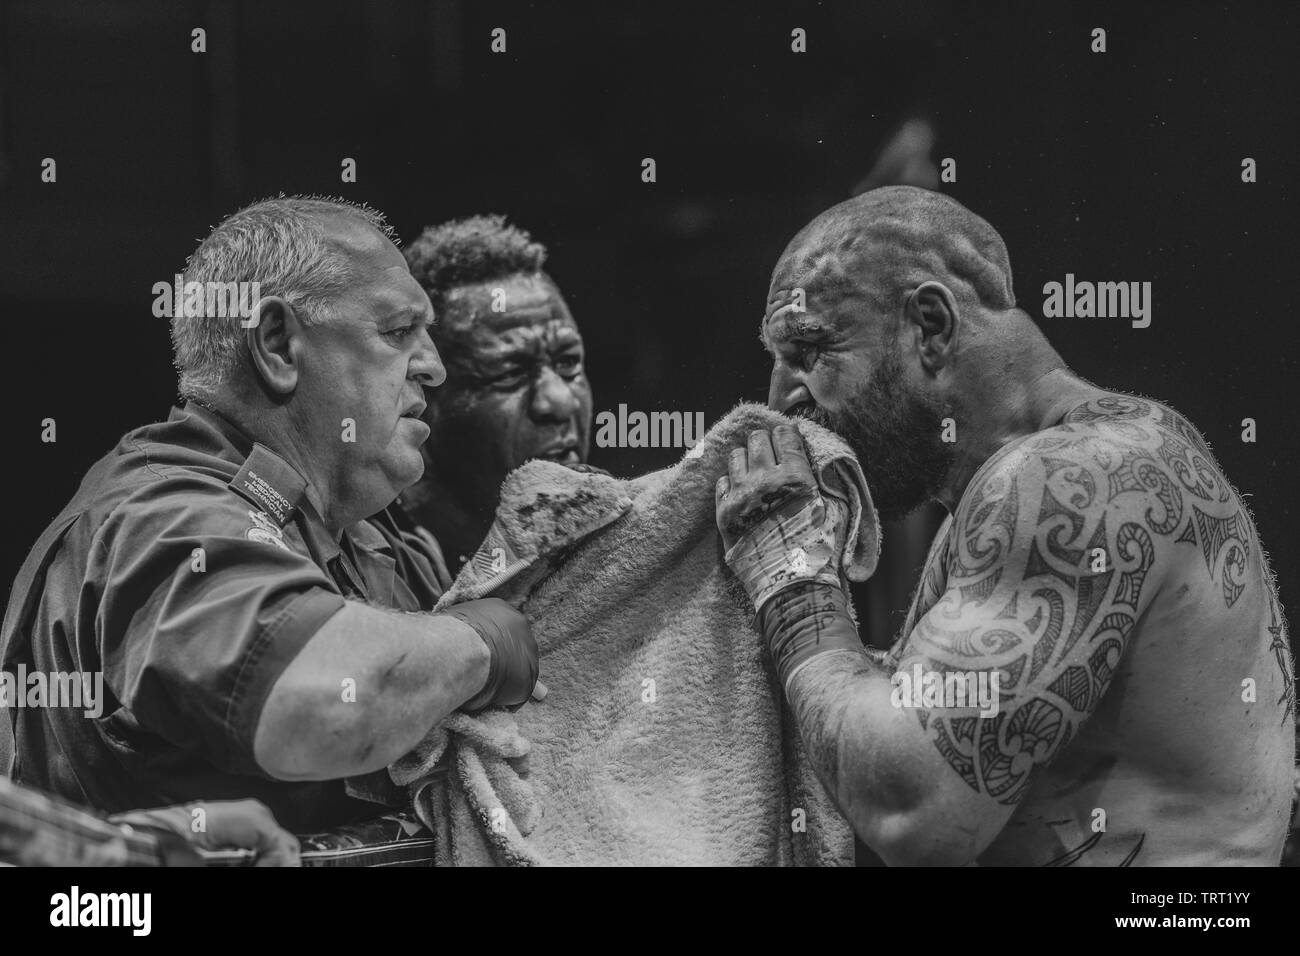 BKB17(bare knuckle boxing) match Dave Thomas(red) vs Mason Shaw(blue)  ,where he wins in the 3rd round Held in London the indigo arena The  O2,08/06/19 Stock Photo - Alamy